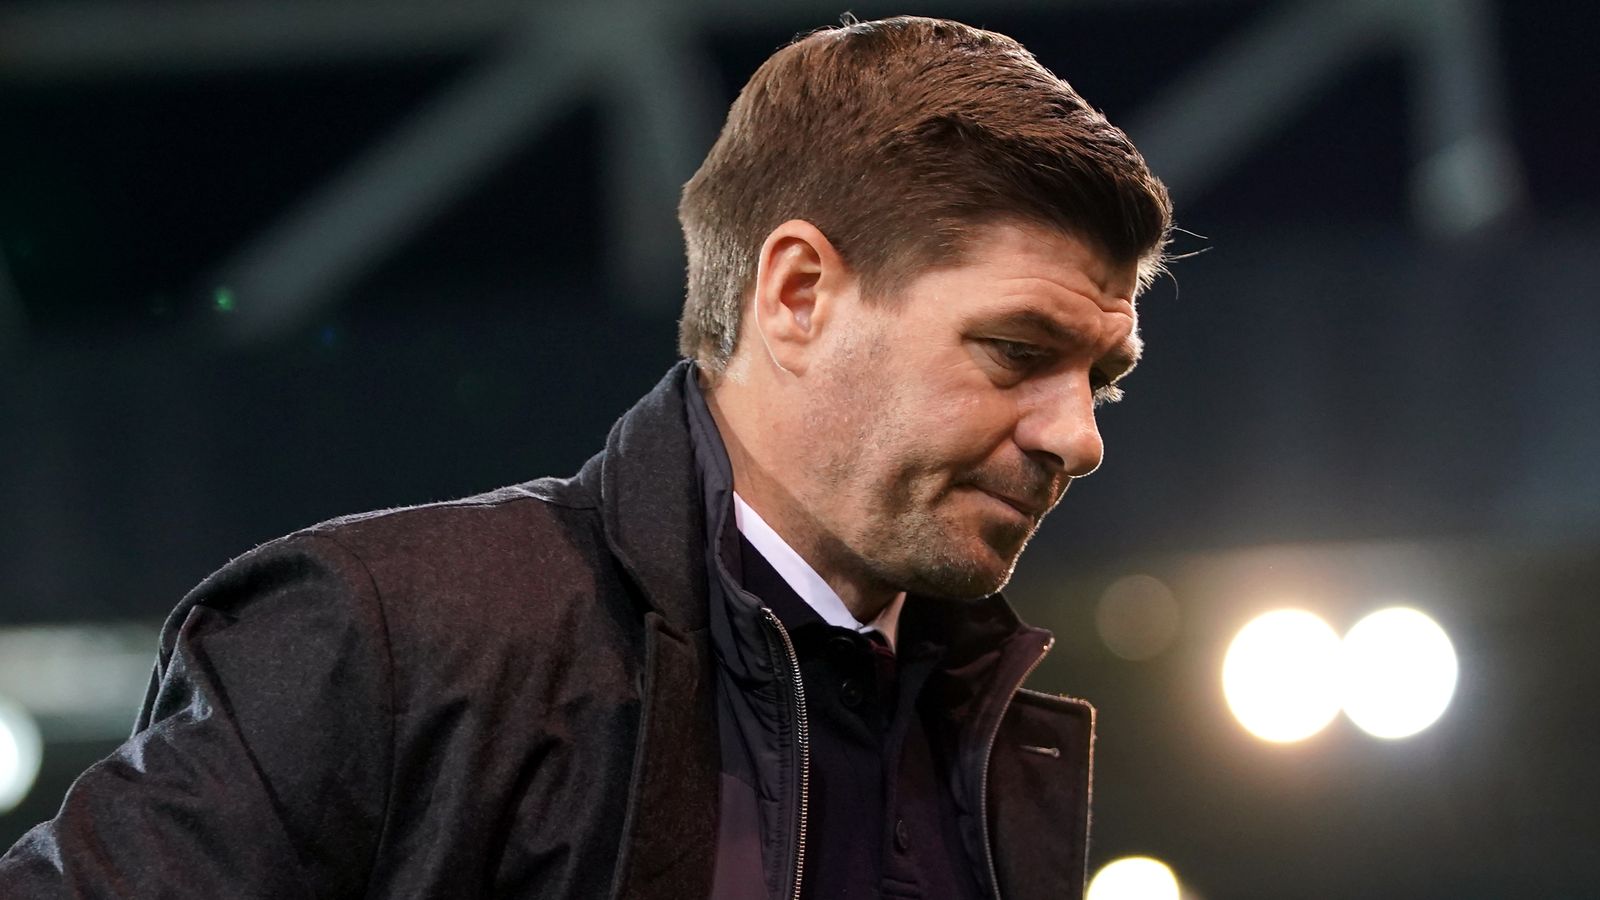 Steven Gerrard to miss Aston Villa's next two games after testing positive for Covid-19